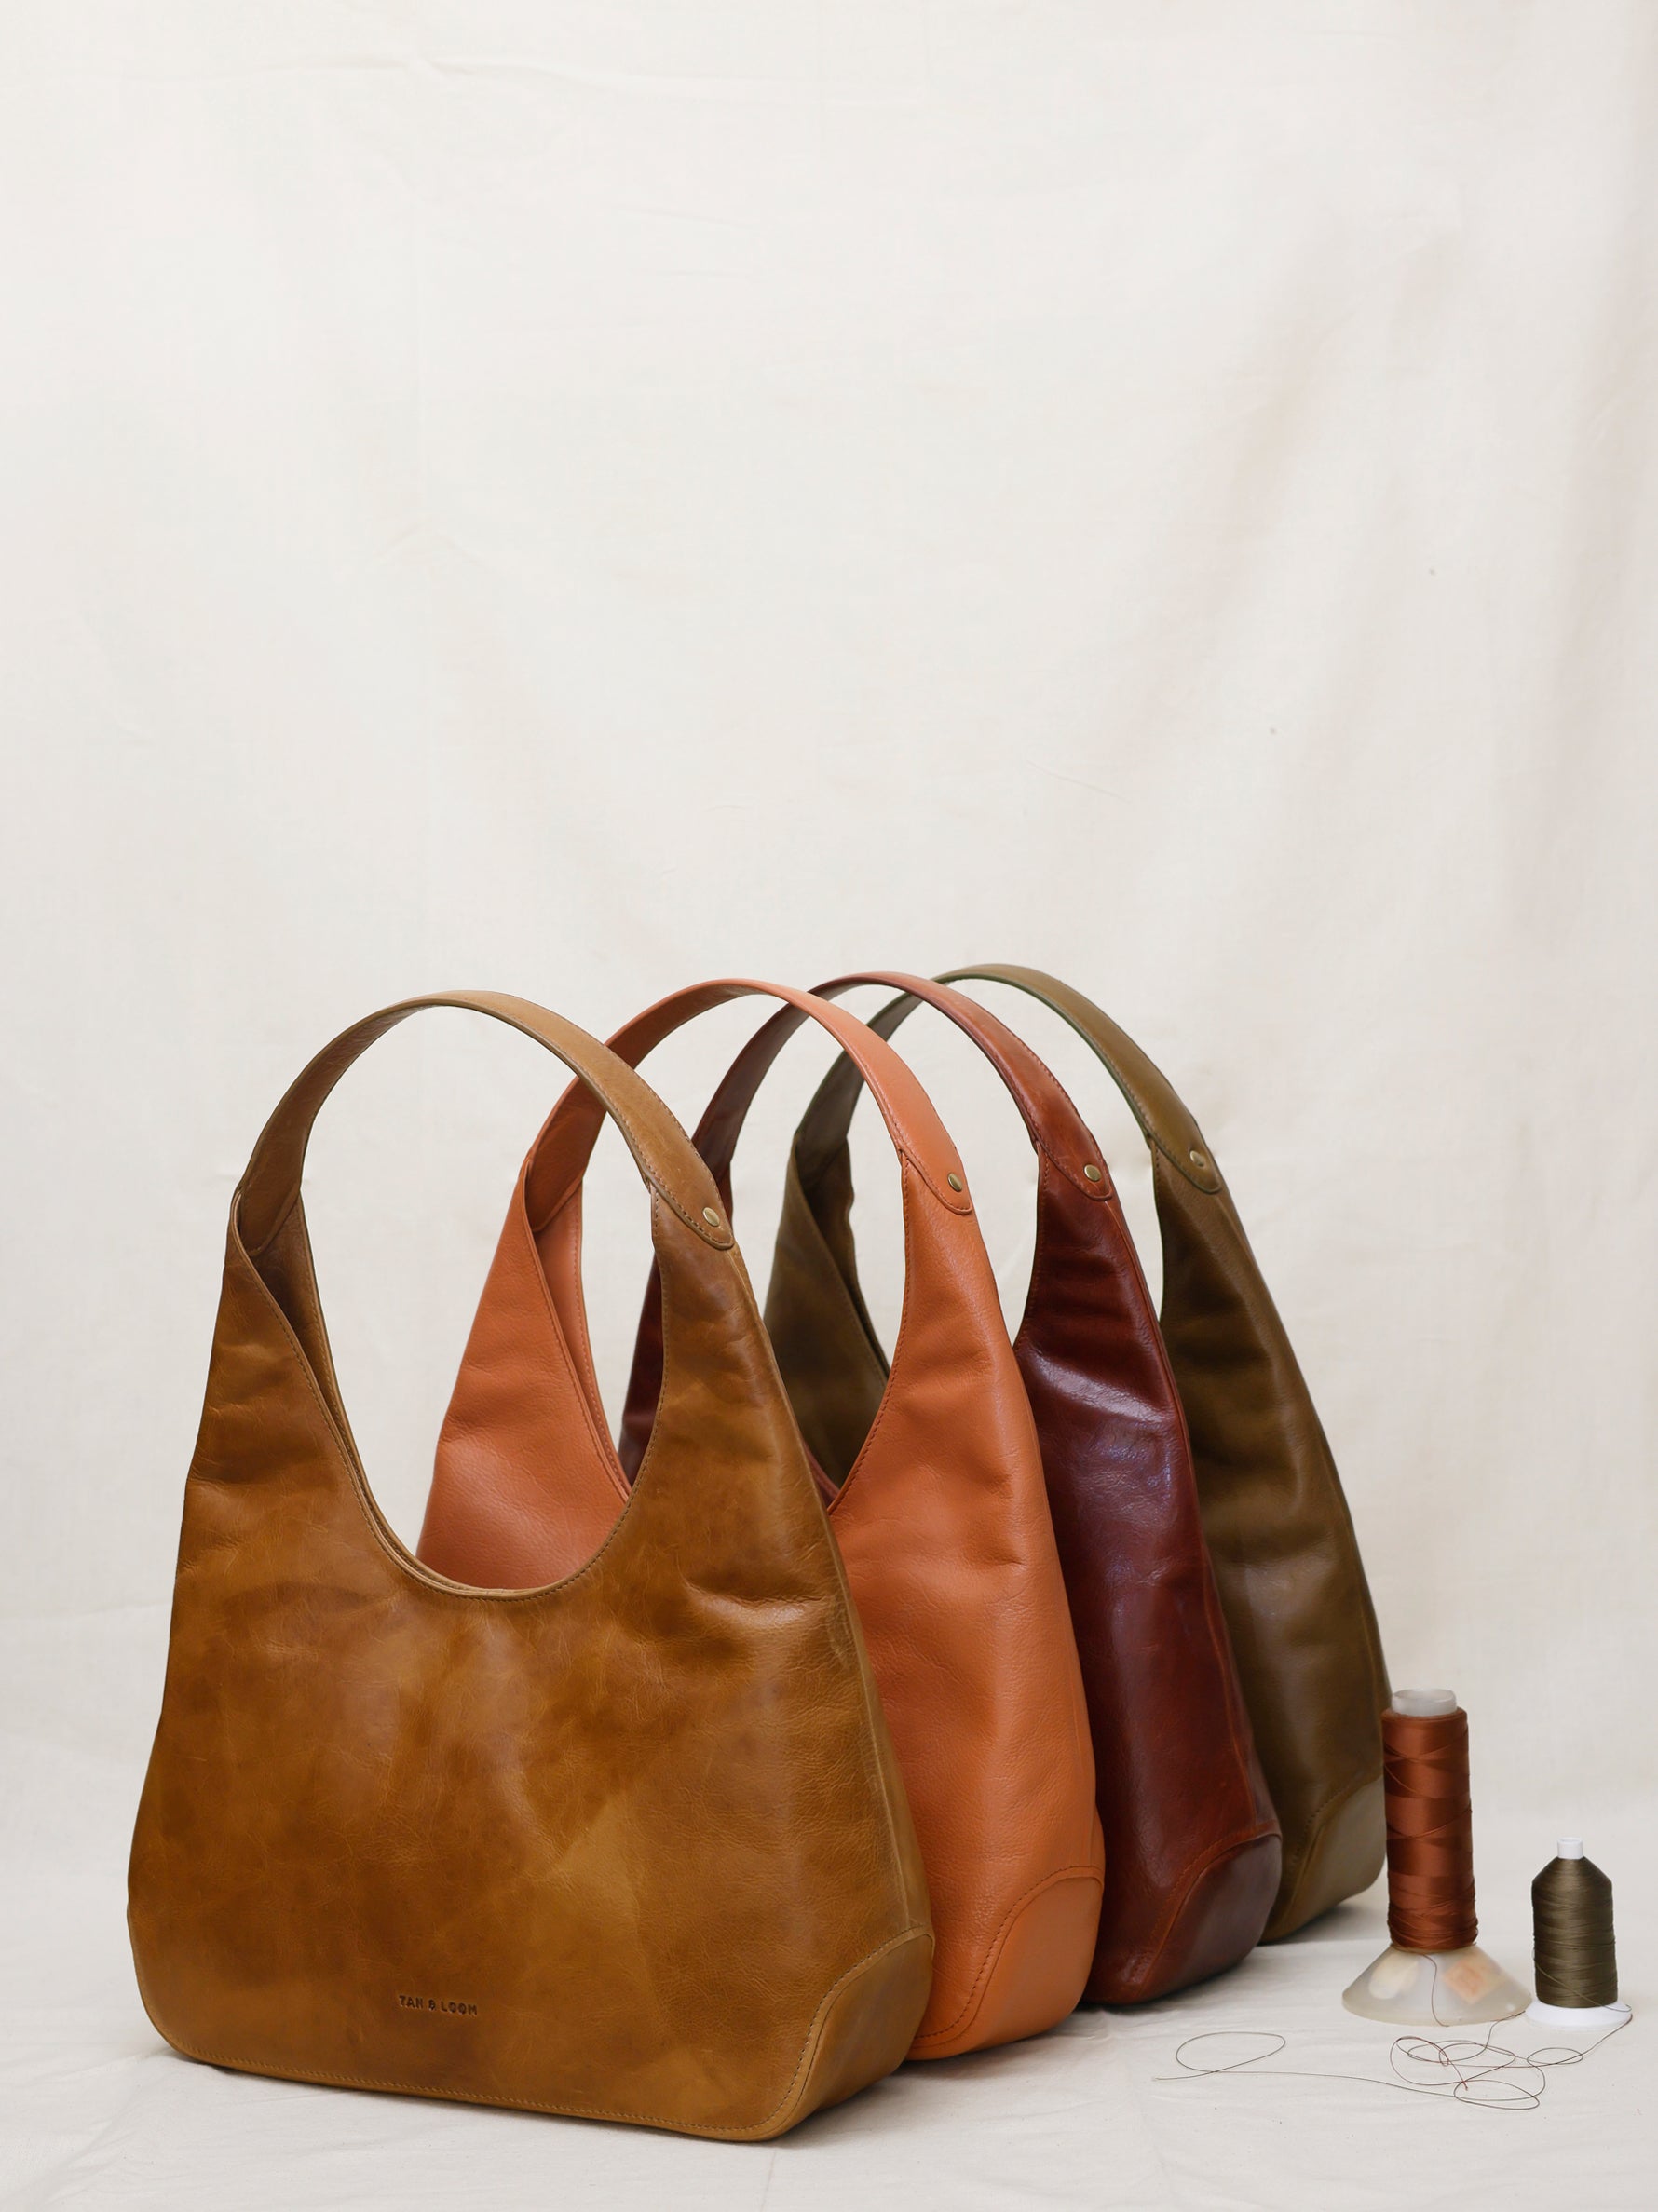 Handcrafted Genuine Vegetable Tanned Leather Hippie's Hobo Dusty Peach for Women Tan & Loom